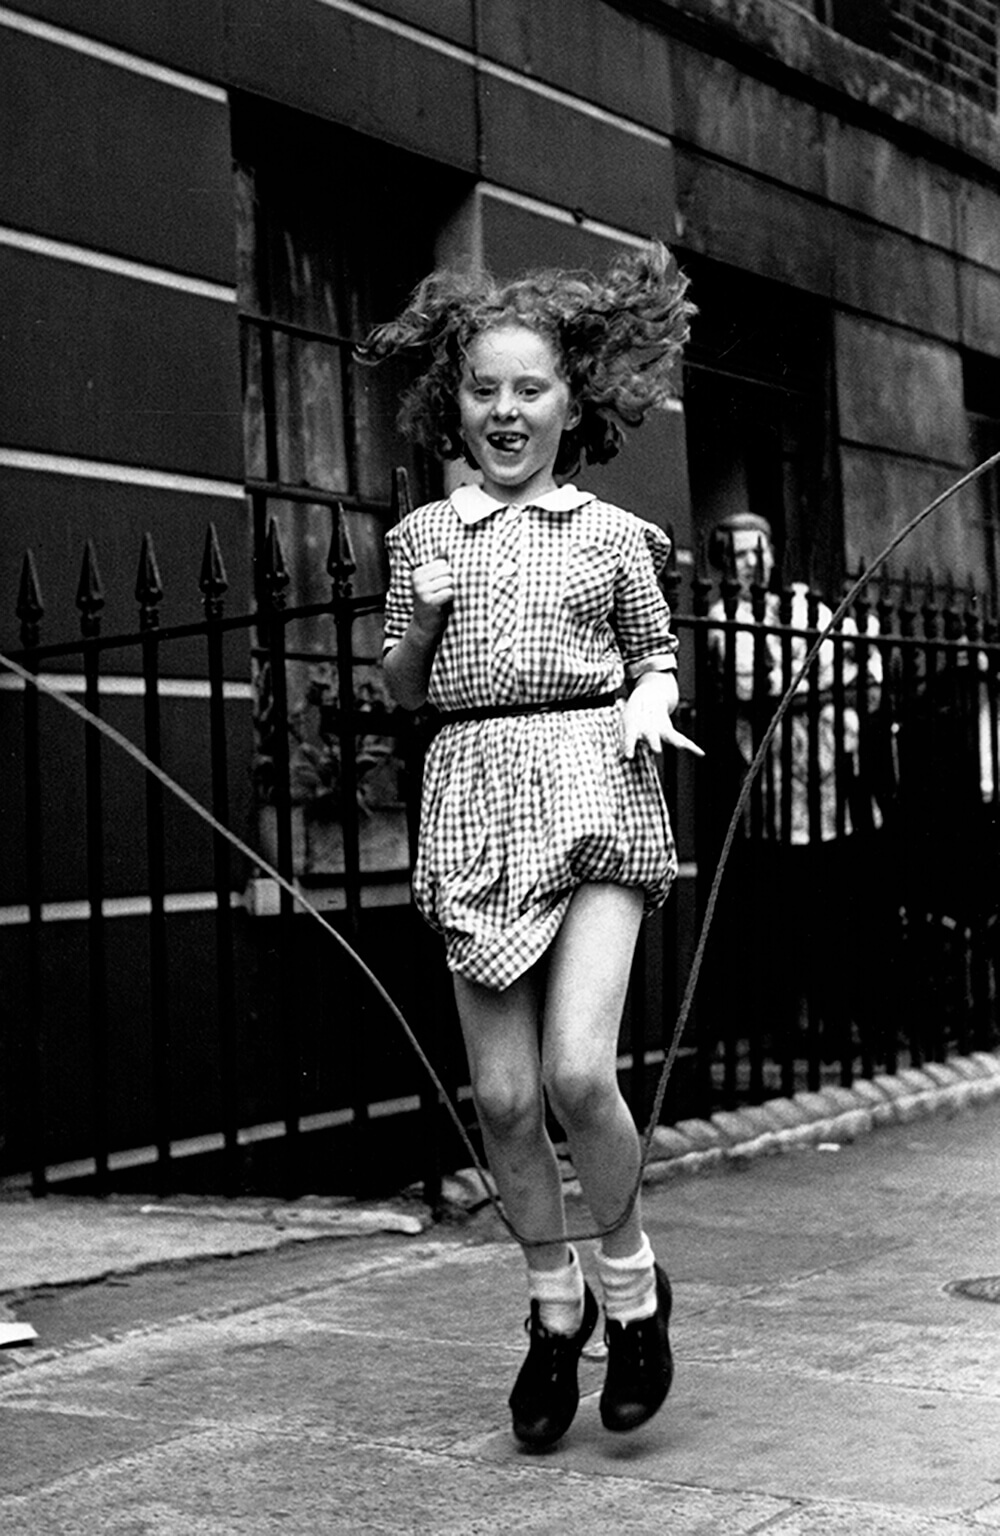 Skipping Rope fine art photography